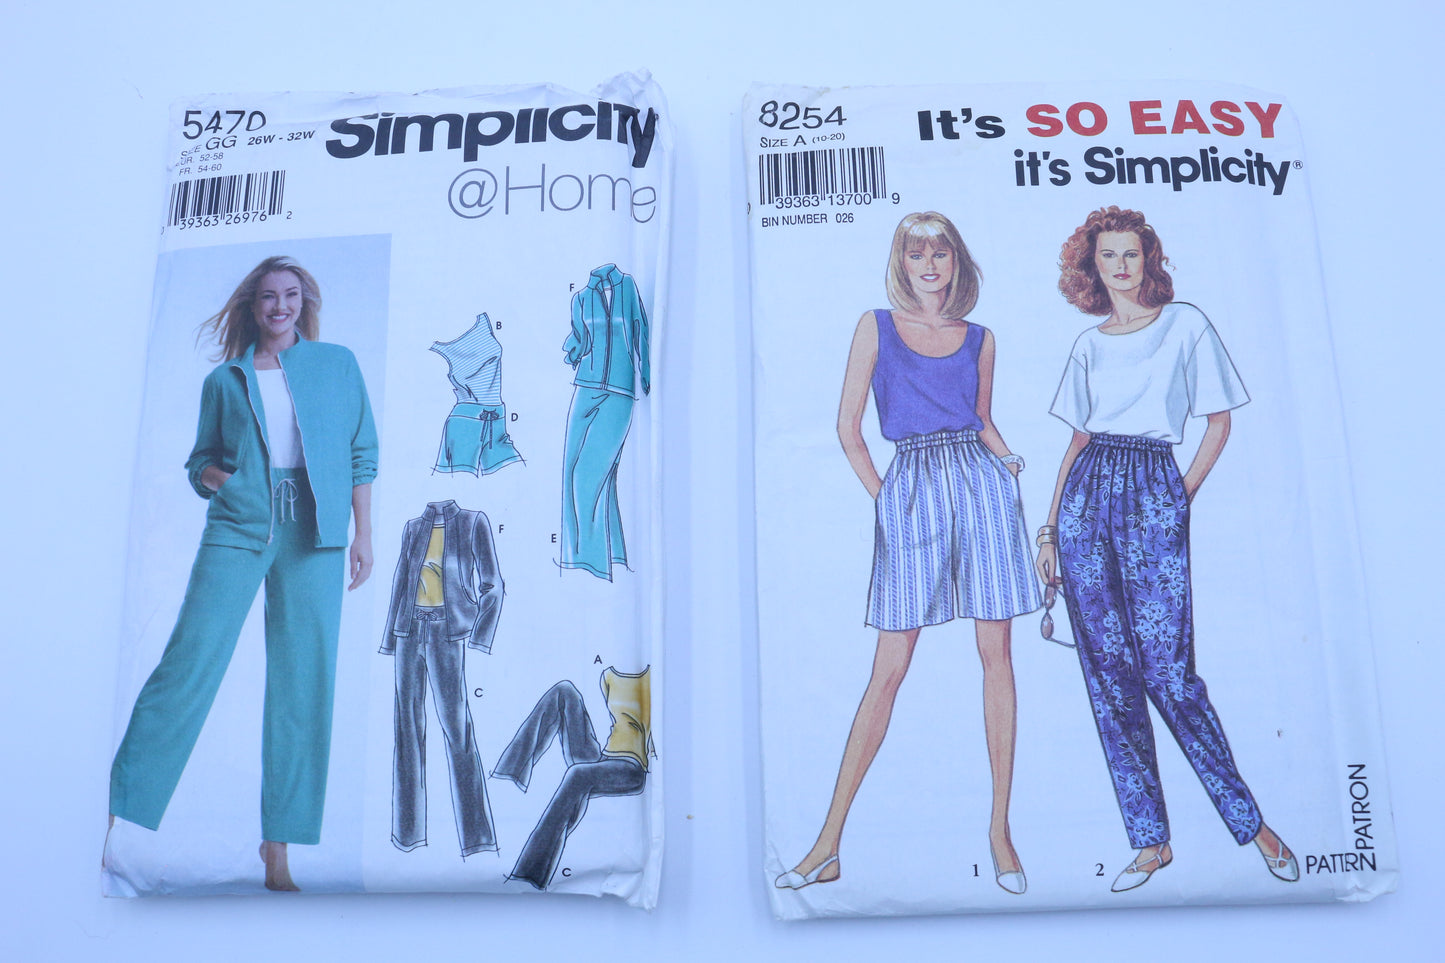 Simplicity 3254 Sewing Pattern or Simplicity 5470 Sewing Pattern